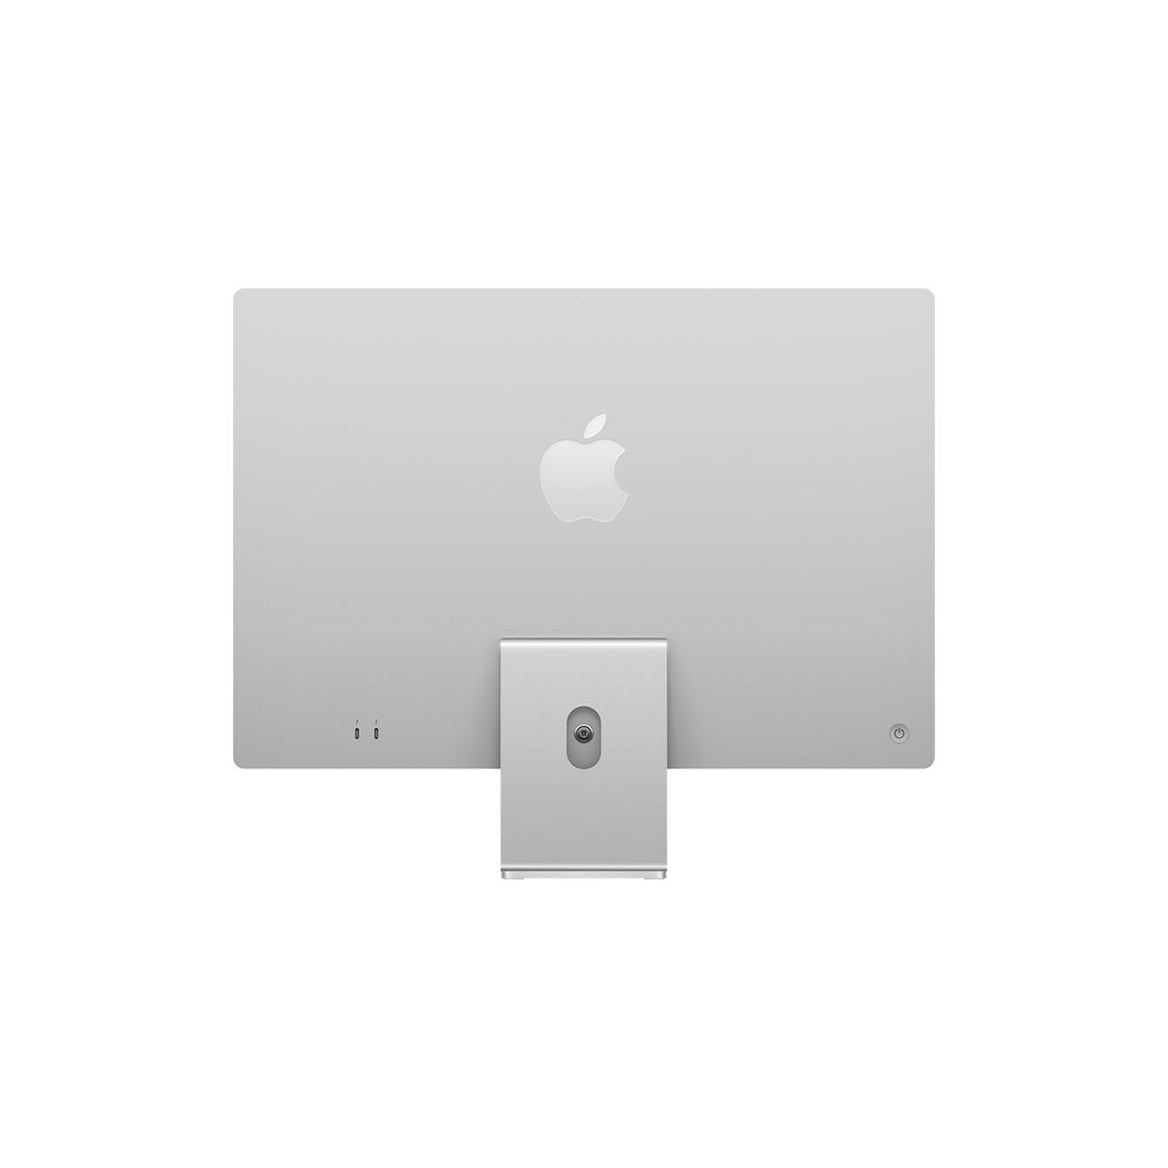 24-inch iMac M1 chip silver back view